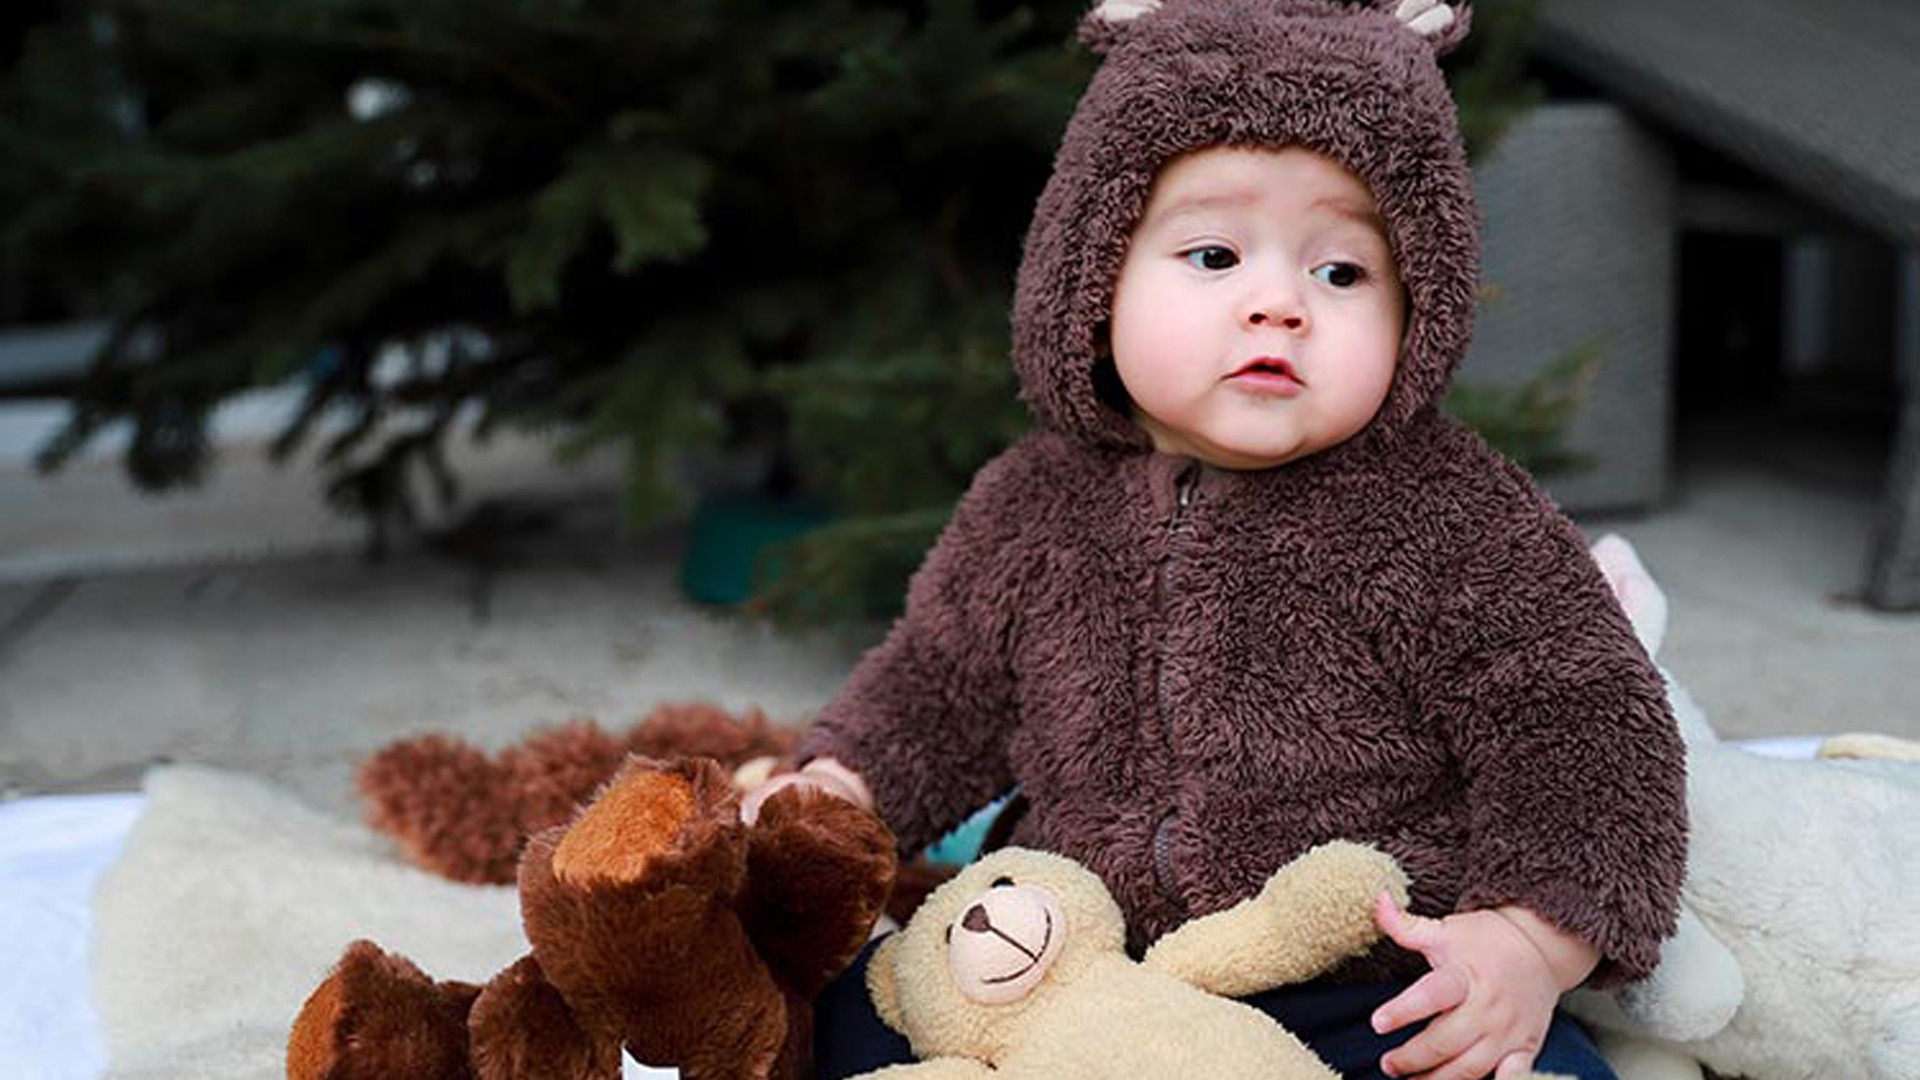 Baby Is Wearing Brown Woolen Knitted Dress